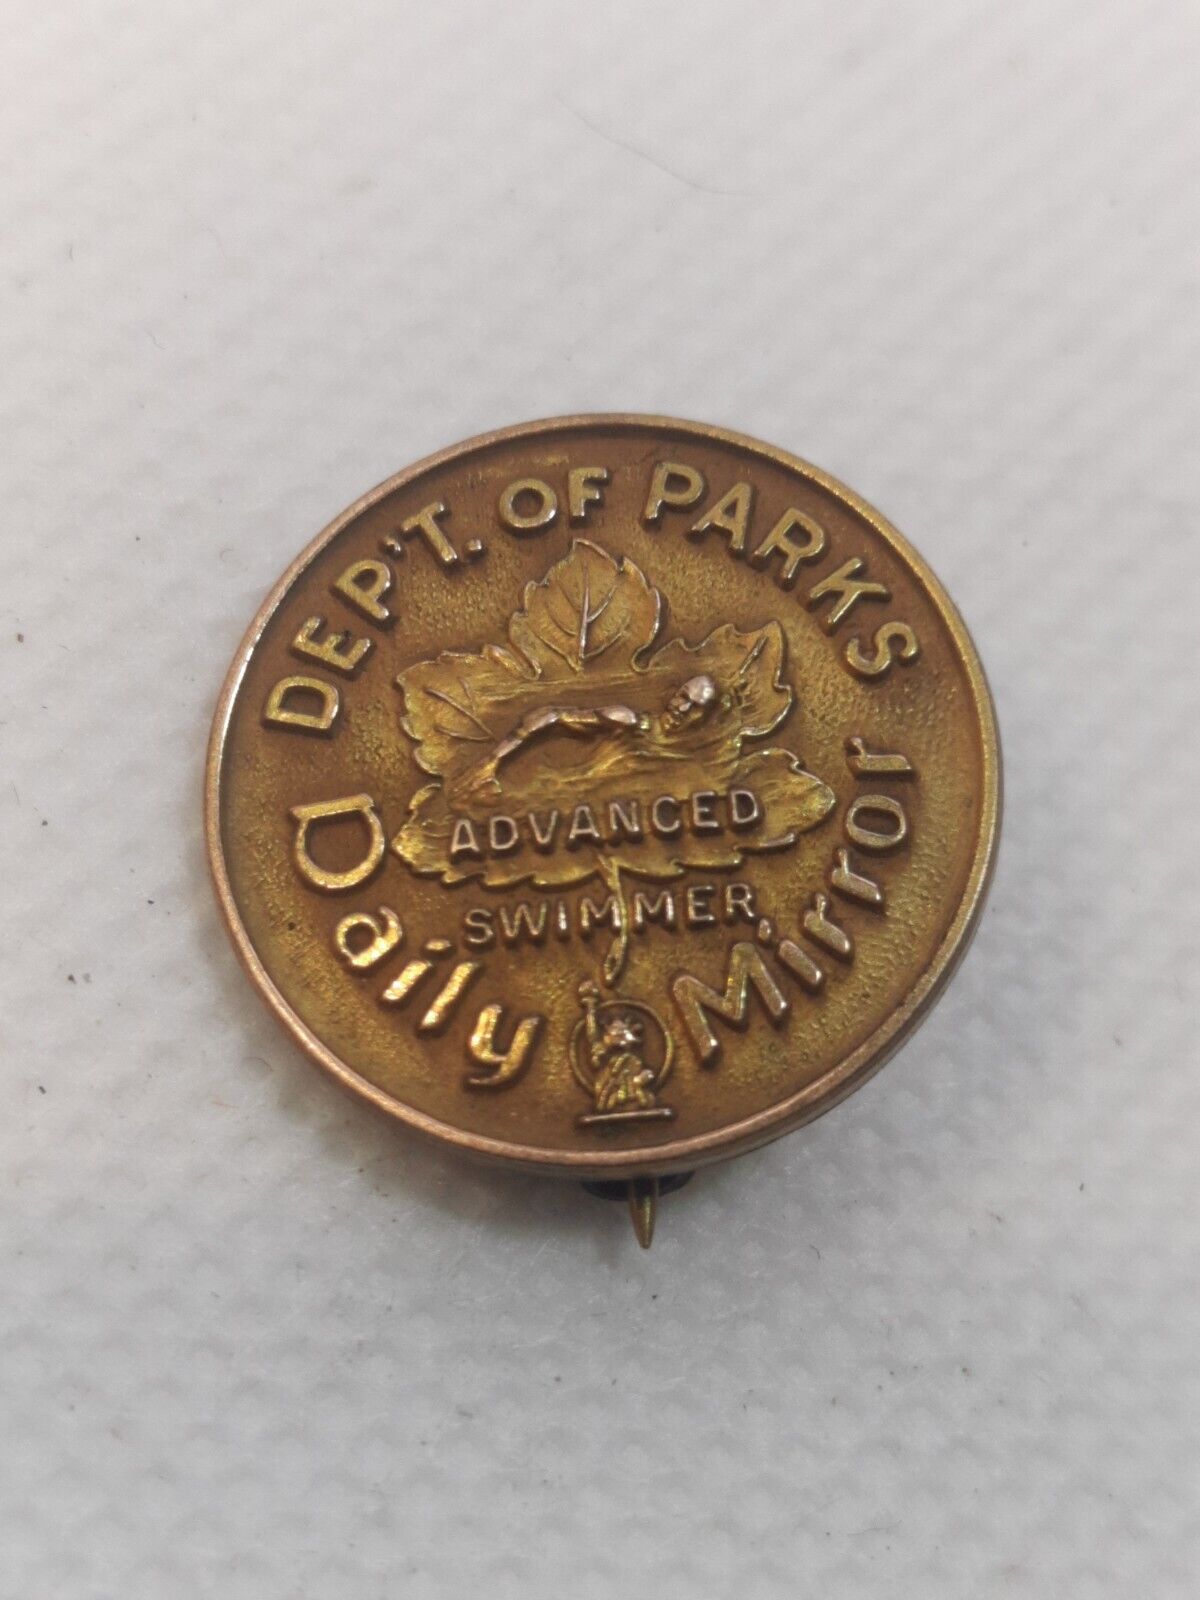 New York City Department Of Parks Advanced Swimmer Medal Pin Antique Vintage.